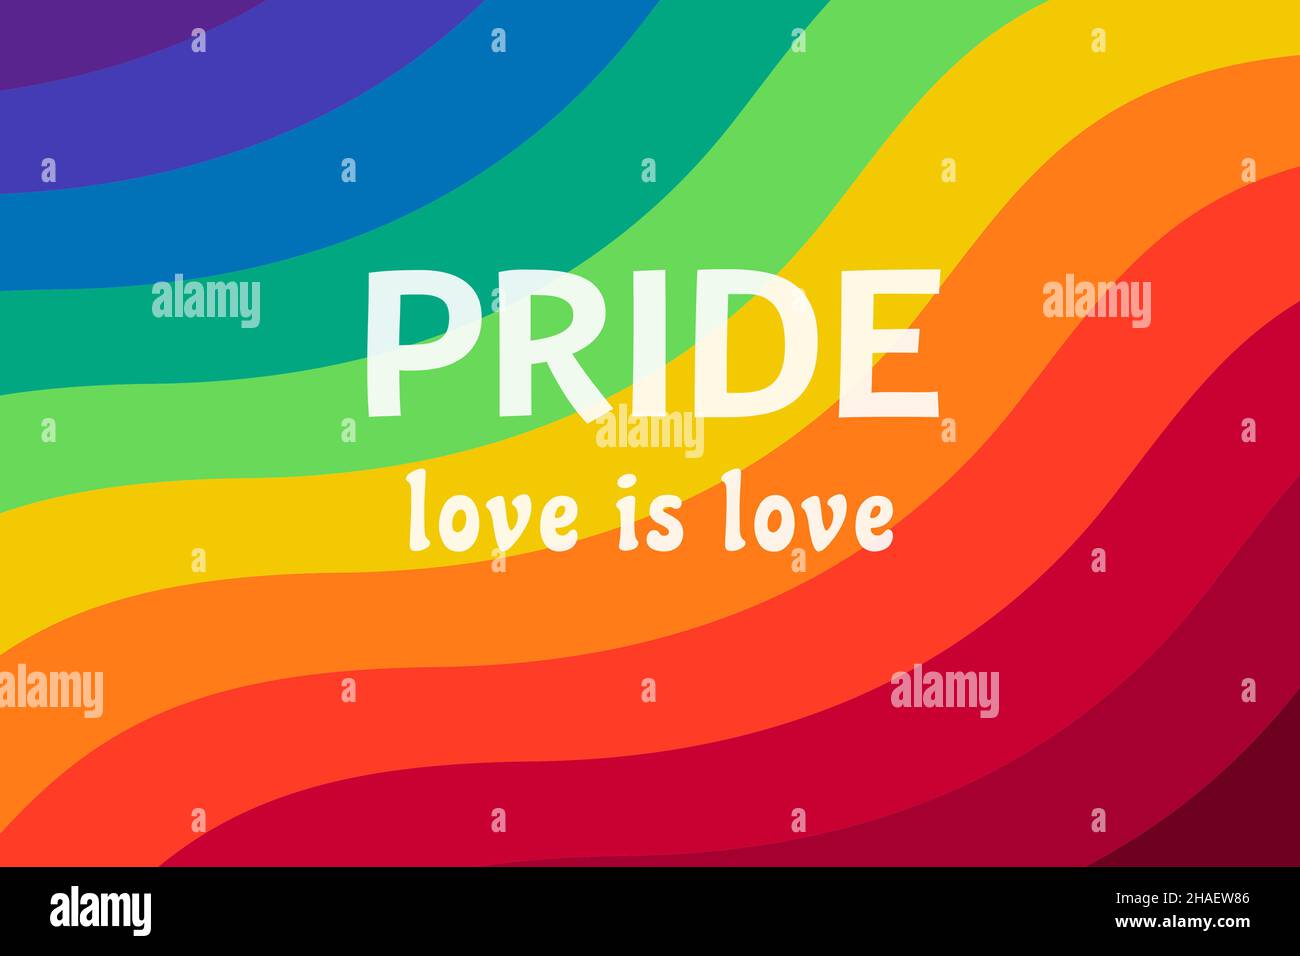 Pride love is love over flag rainbow lgbt concept background vector illustration Stock Photo